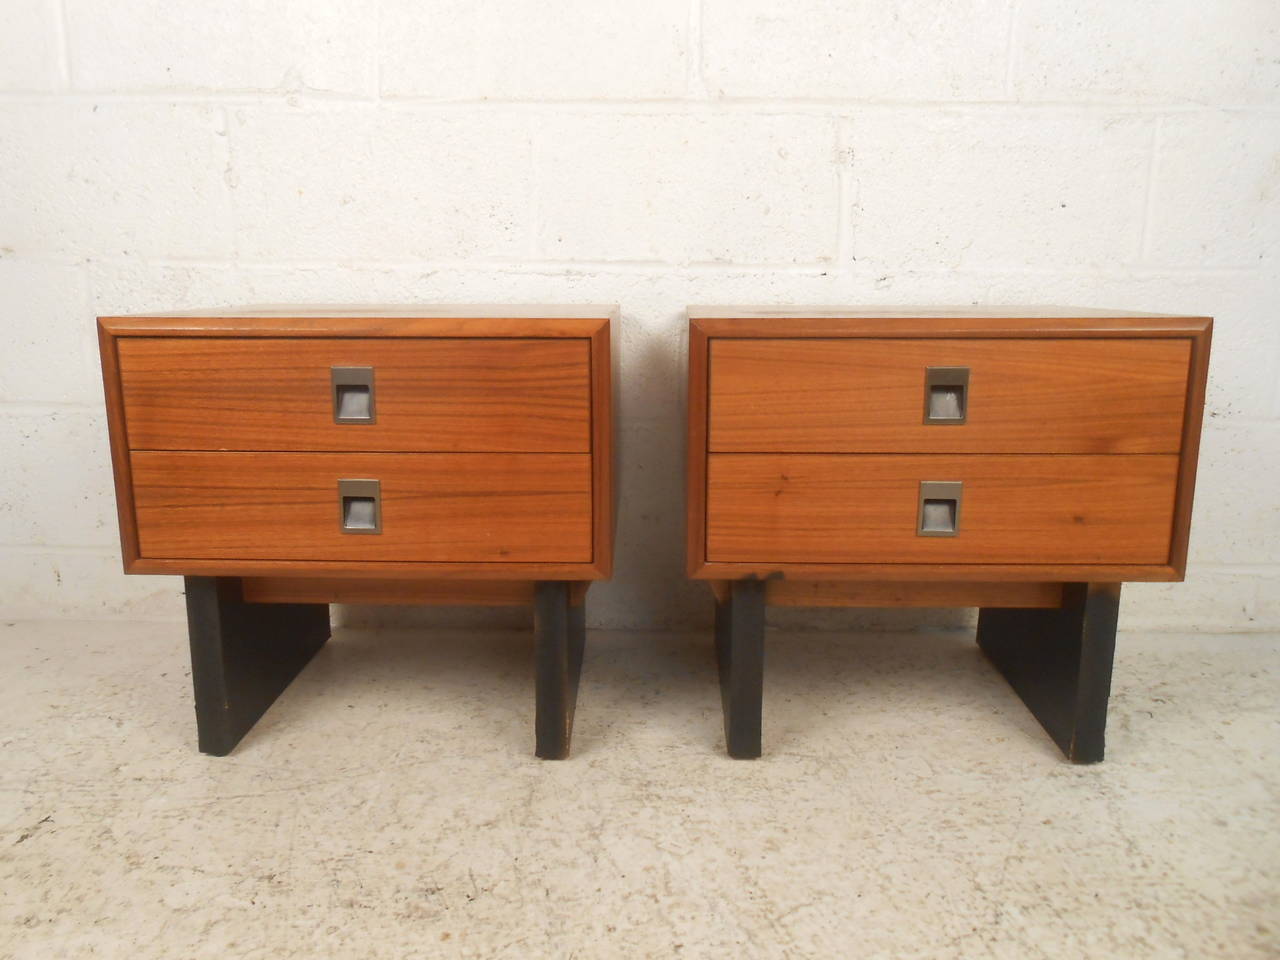 This pair of midcentury end tables feature a beautiful teak finish, two large drawers with carved pulls, and a sturdy black base which offers a modern accent and additional storage to any home or office space.

Please confirm item location (NY or